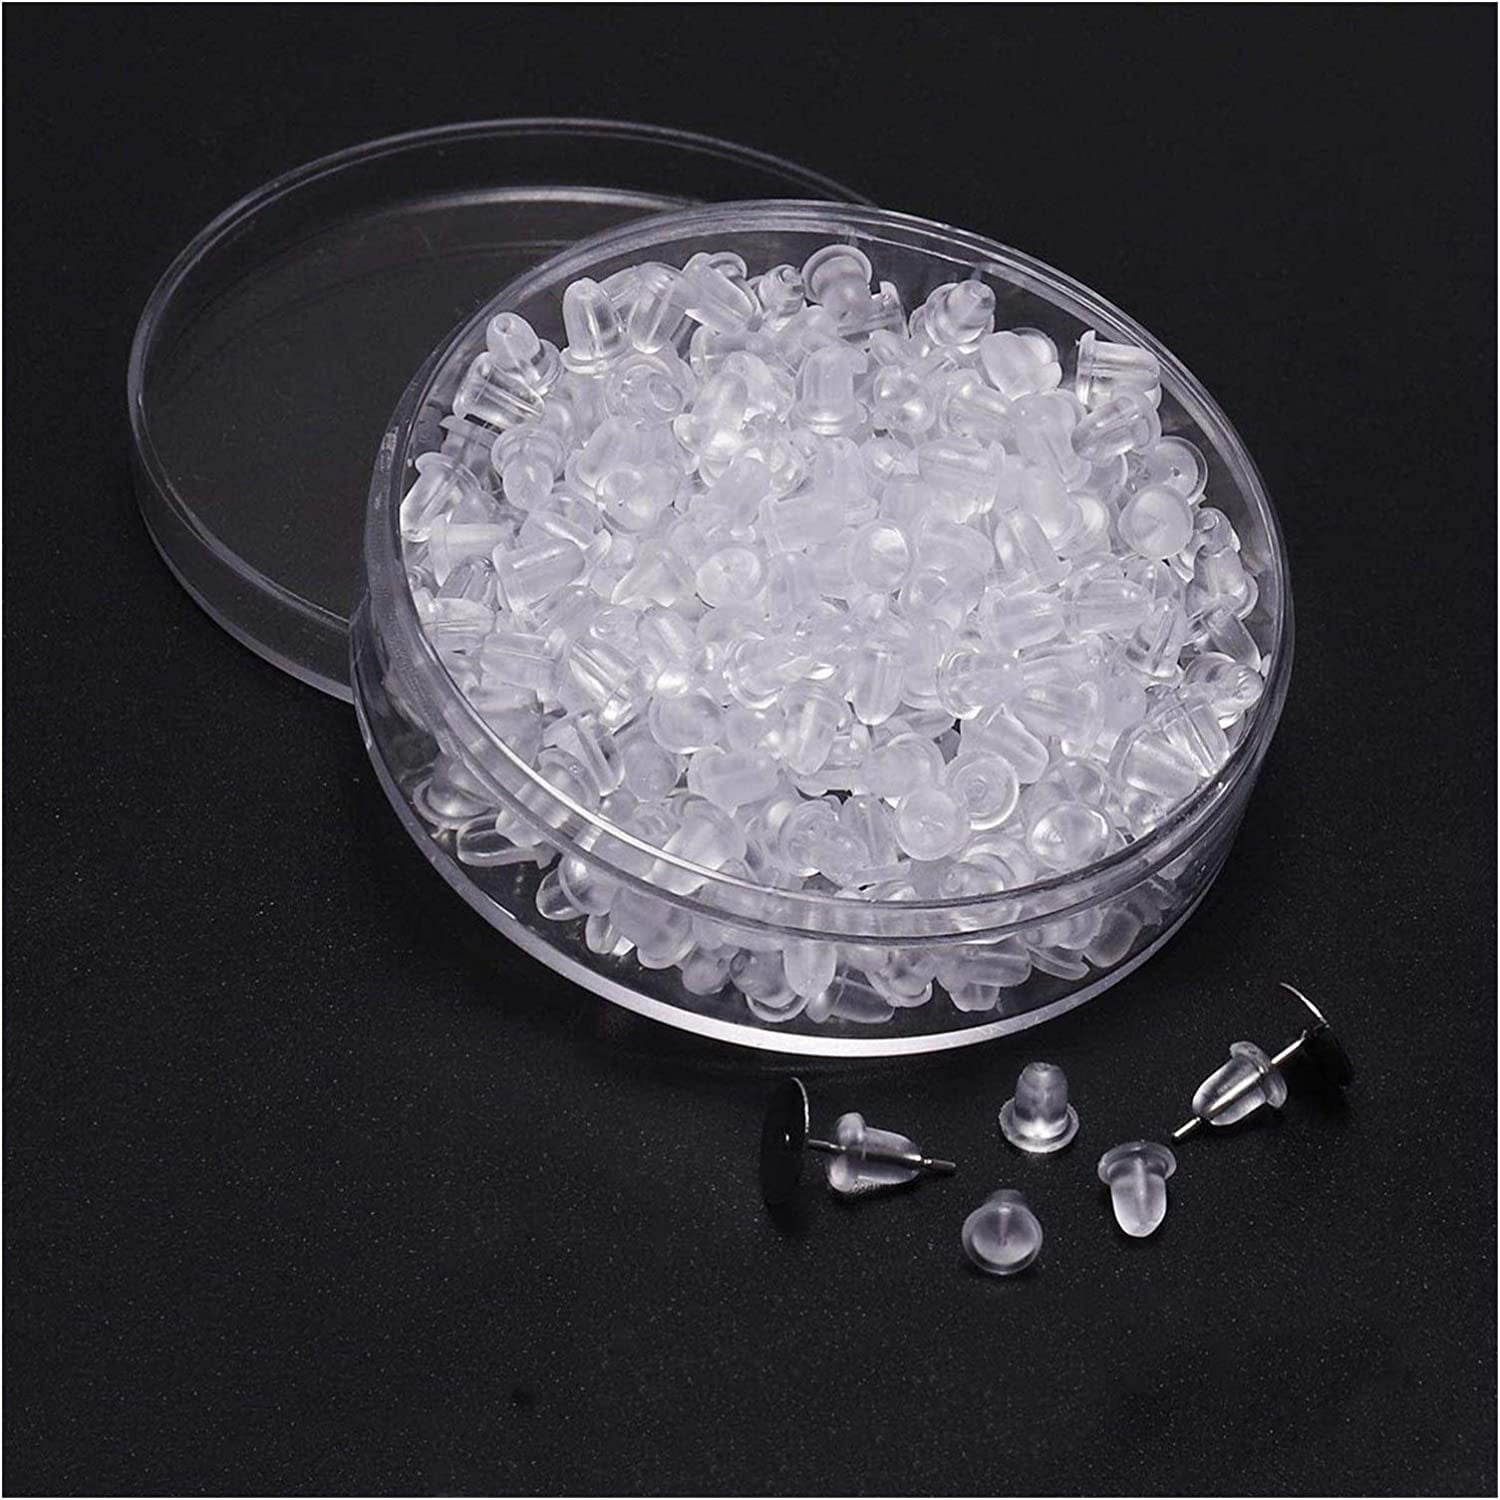 100-300Pcs Rubber Earring Back Silicone Round Ear Plug Blocked